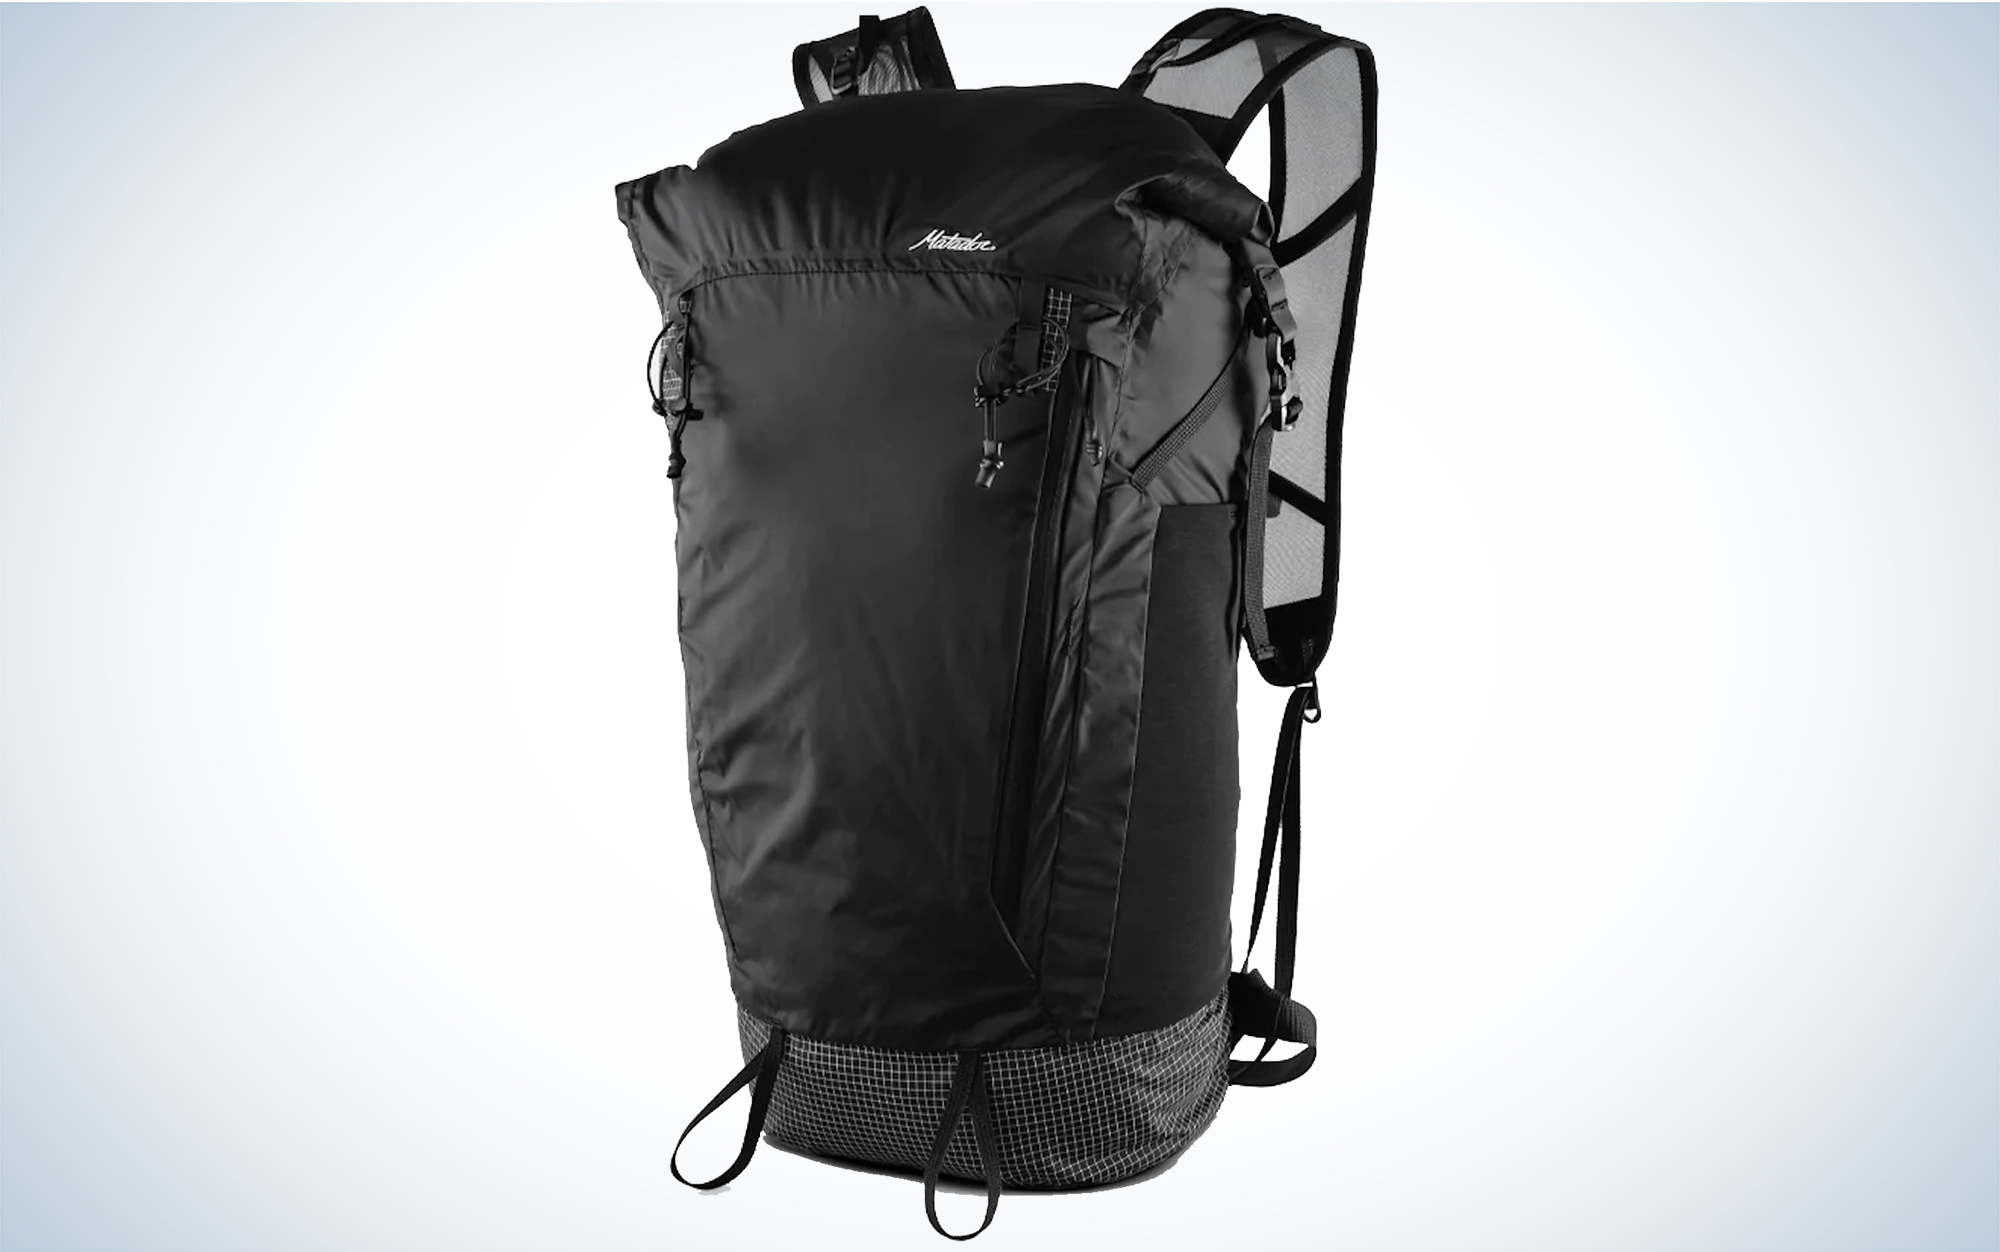 The Matador FreerainÂ is one of the best hiking daypacks.